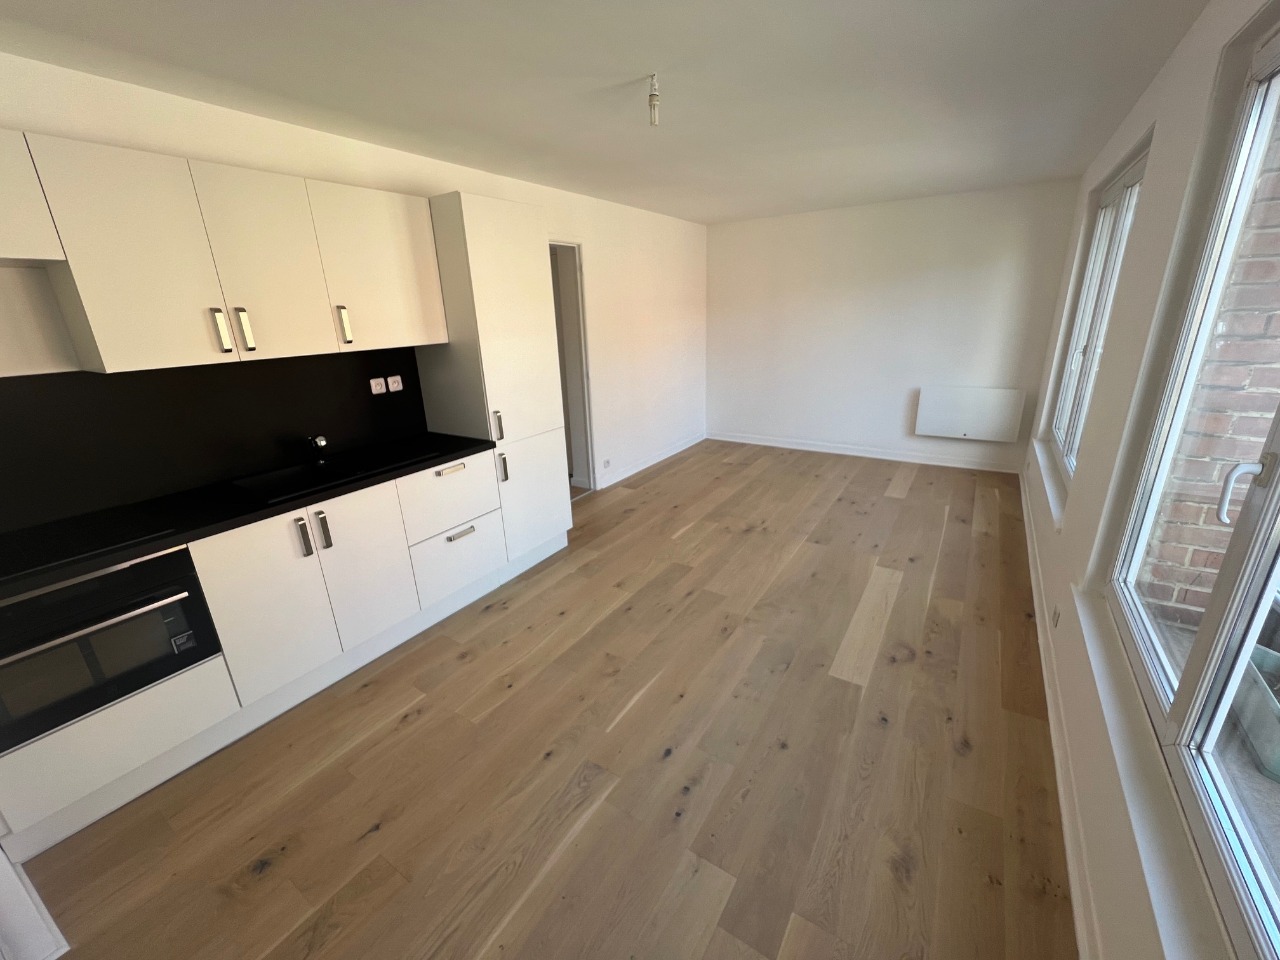 T2 renove Photo 3 - JLW Immobilier